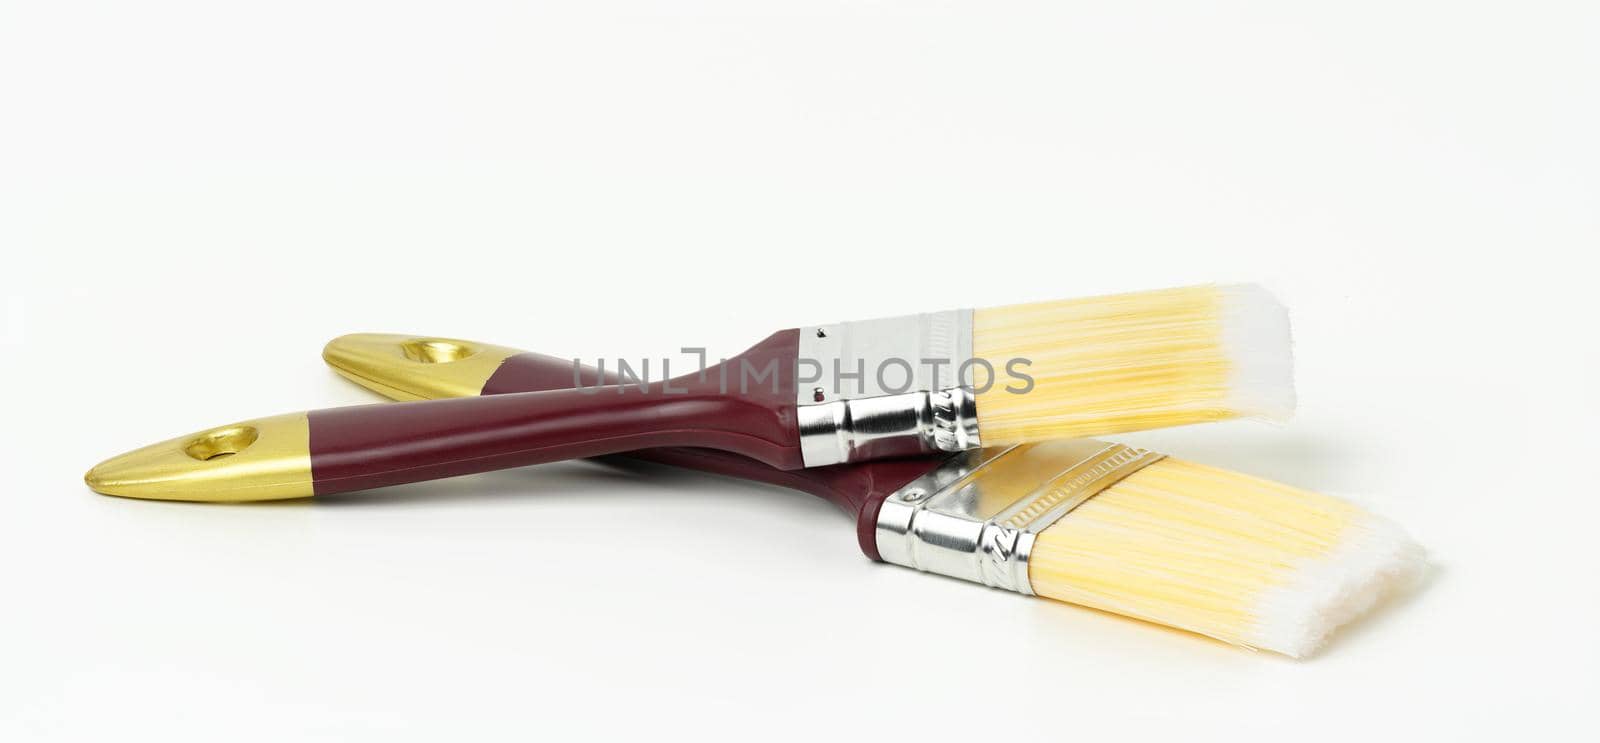 soft paint brush on wooden handle on white background by ndanko